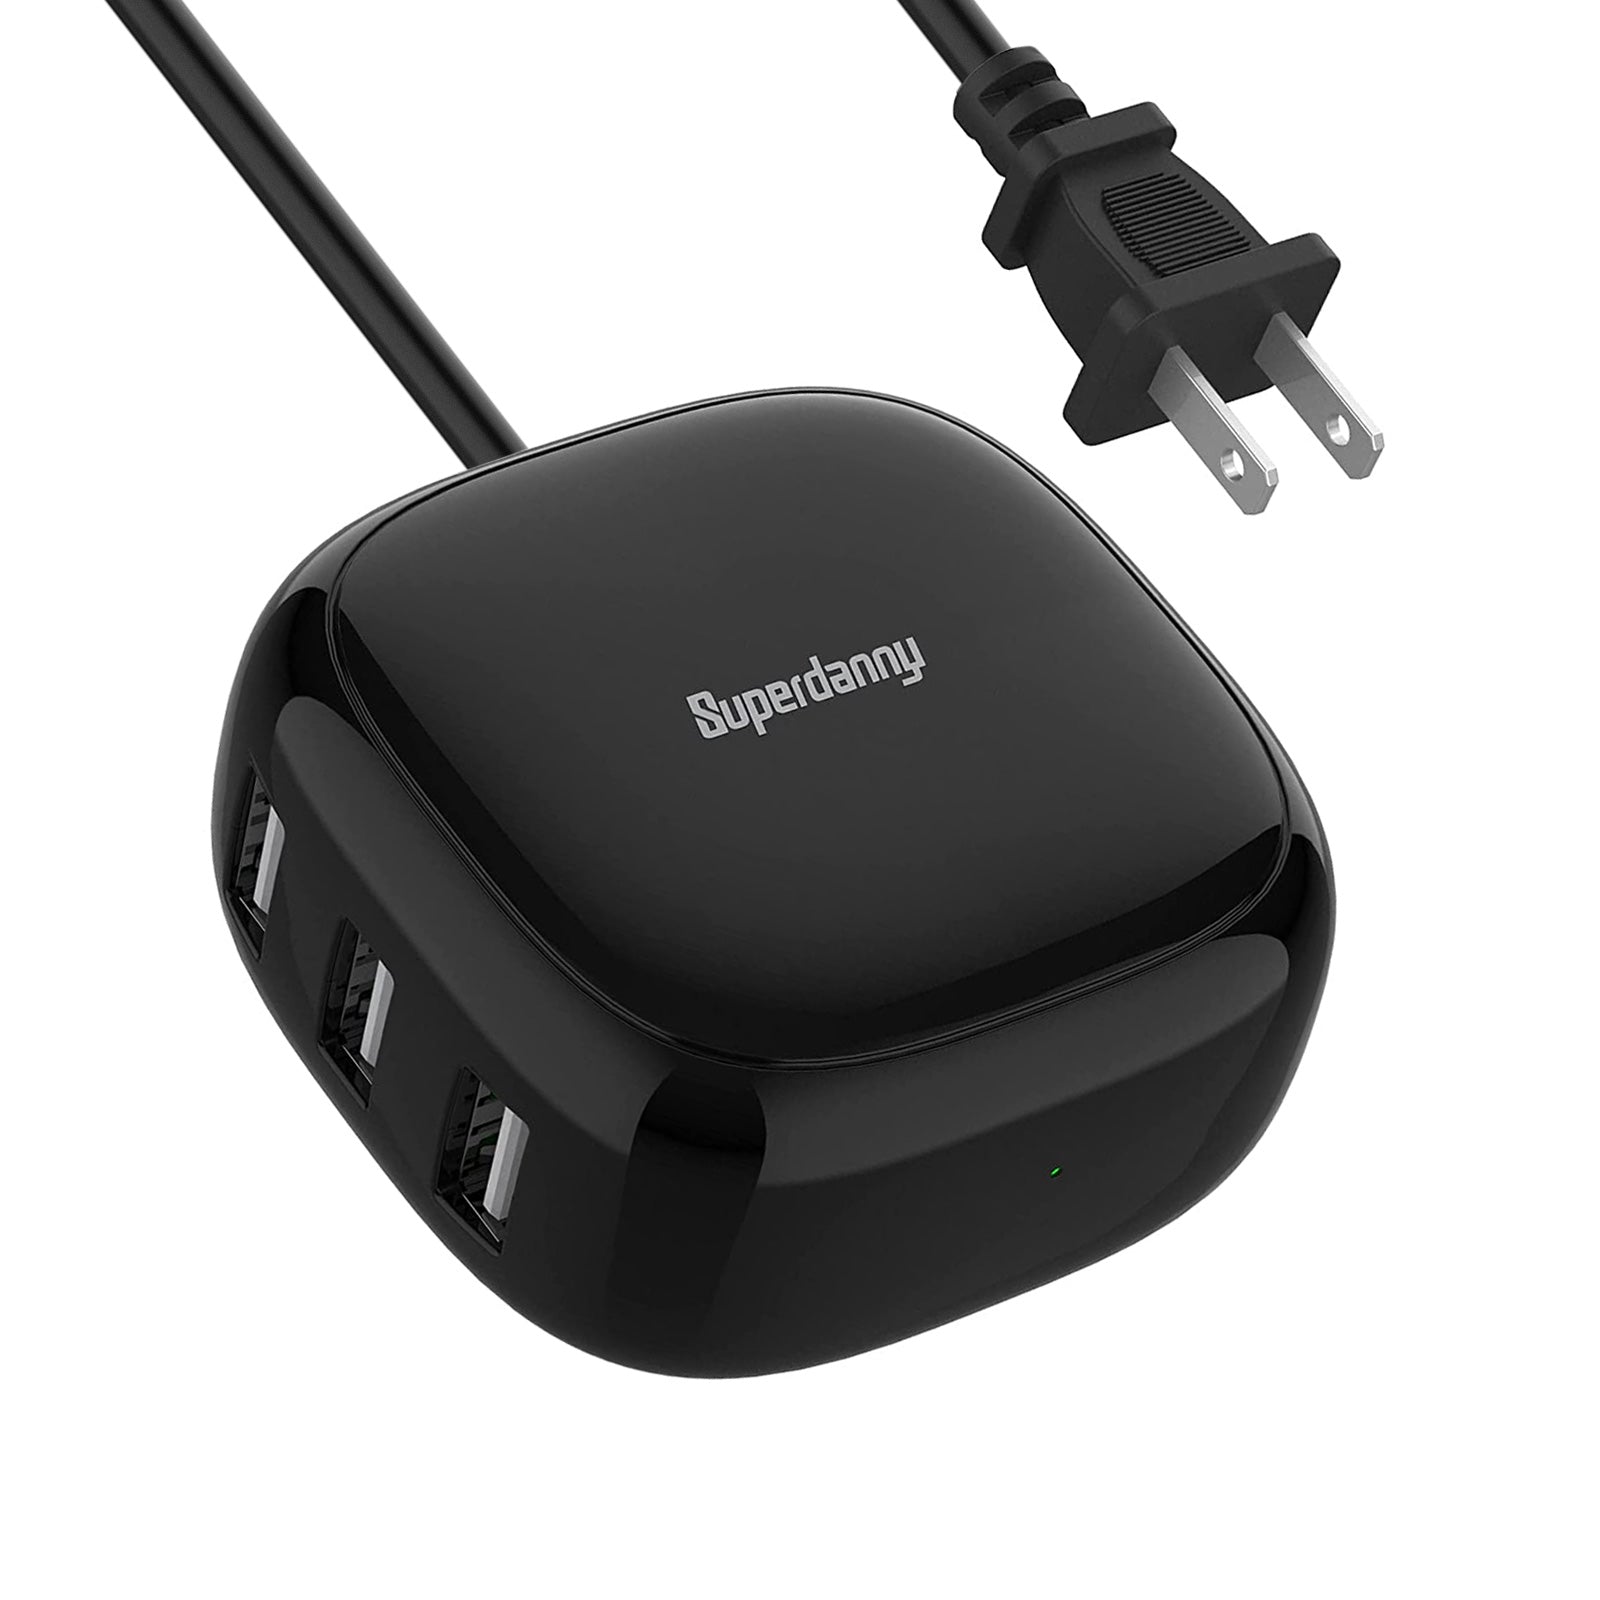 SUPERDANNY Multi USB Charger with 6 Ports Desktop USB Charging Station